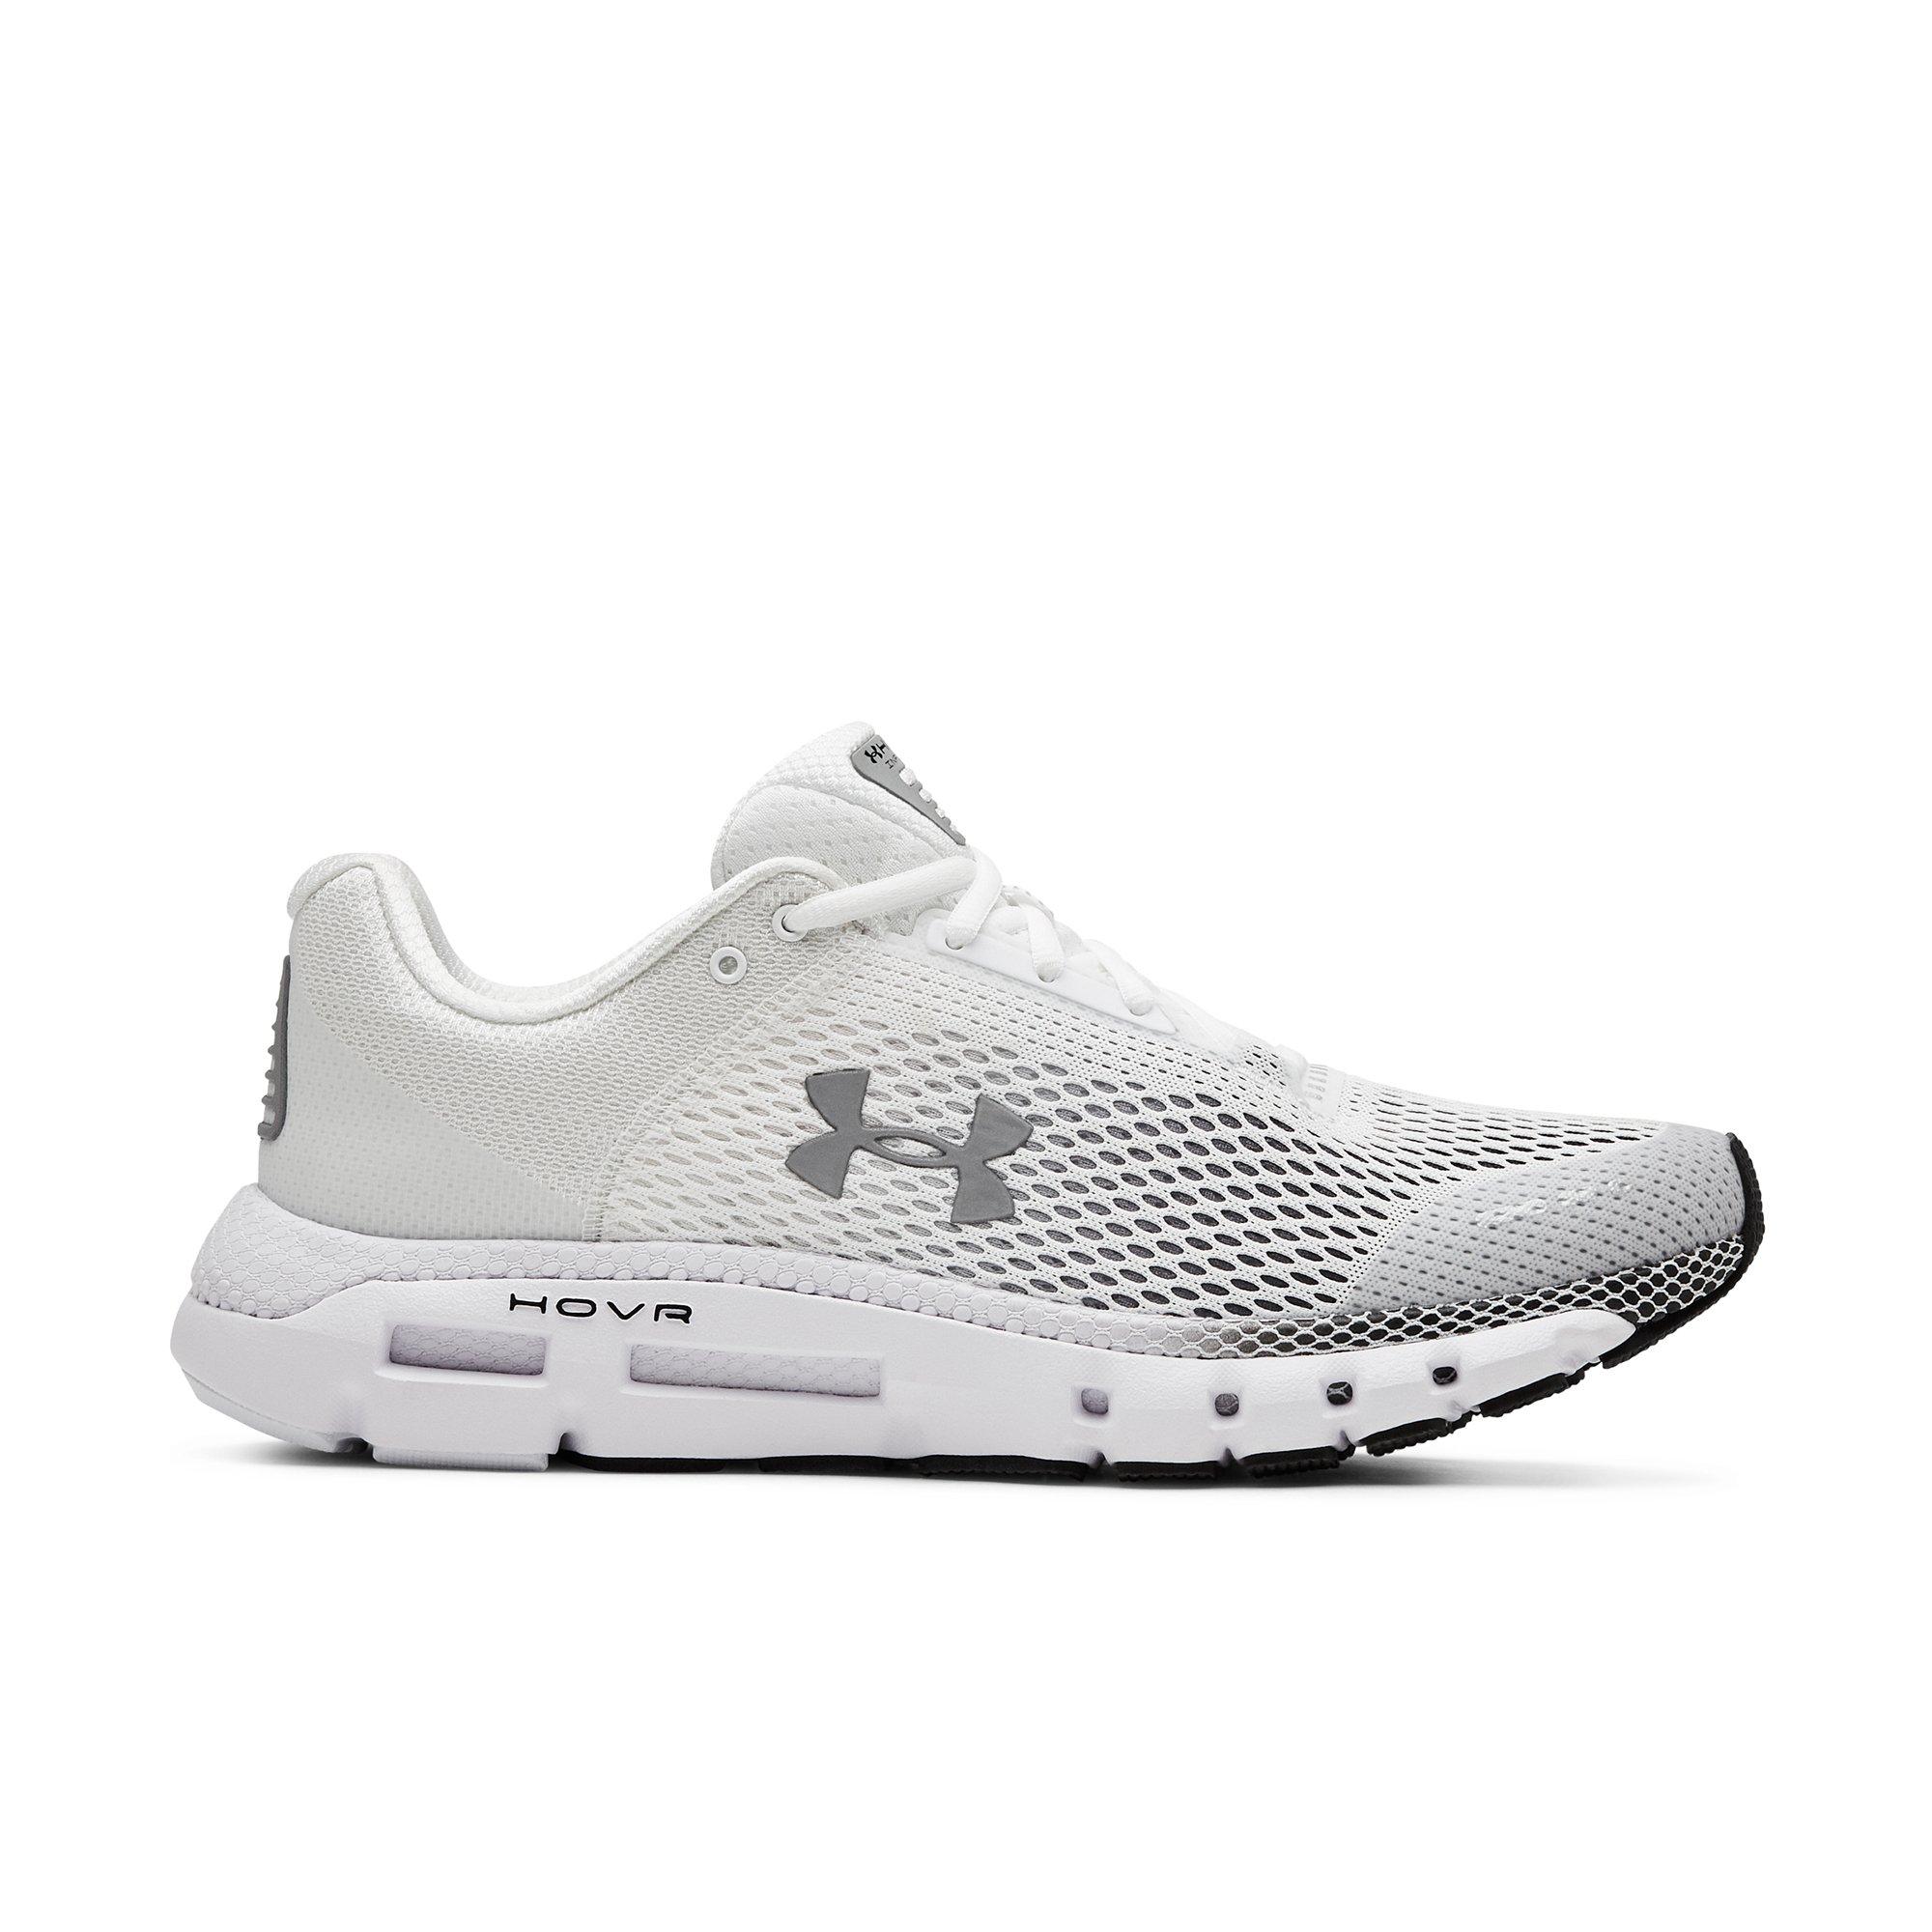 under armour hovr white gold